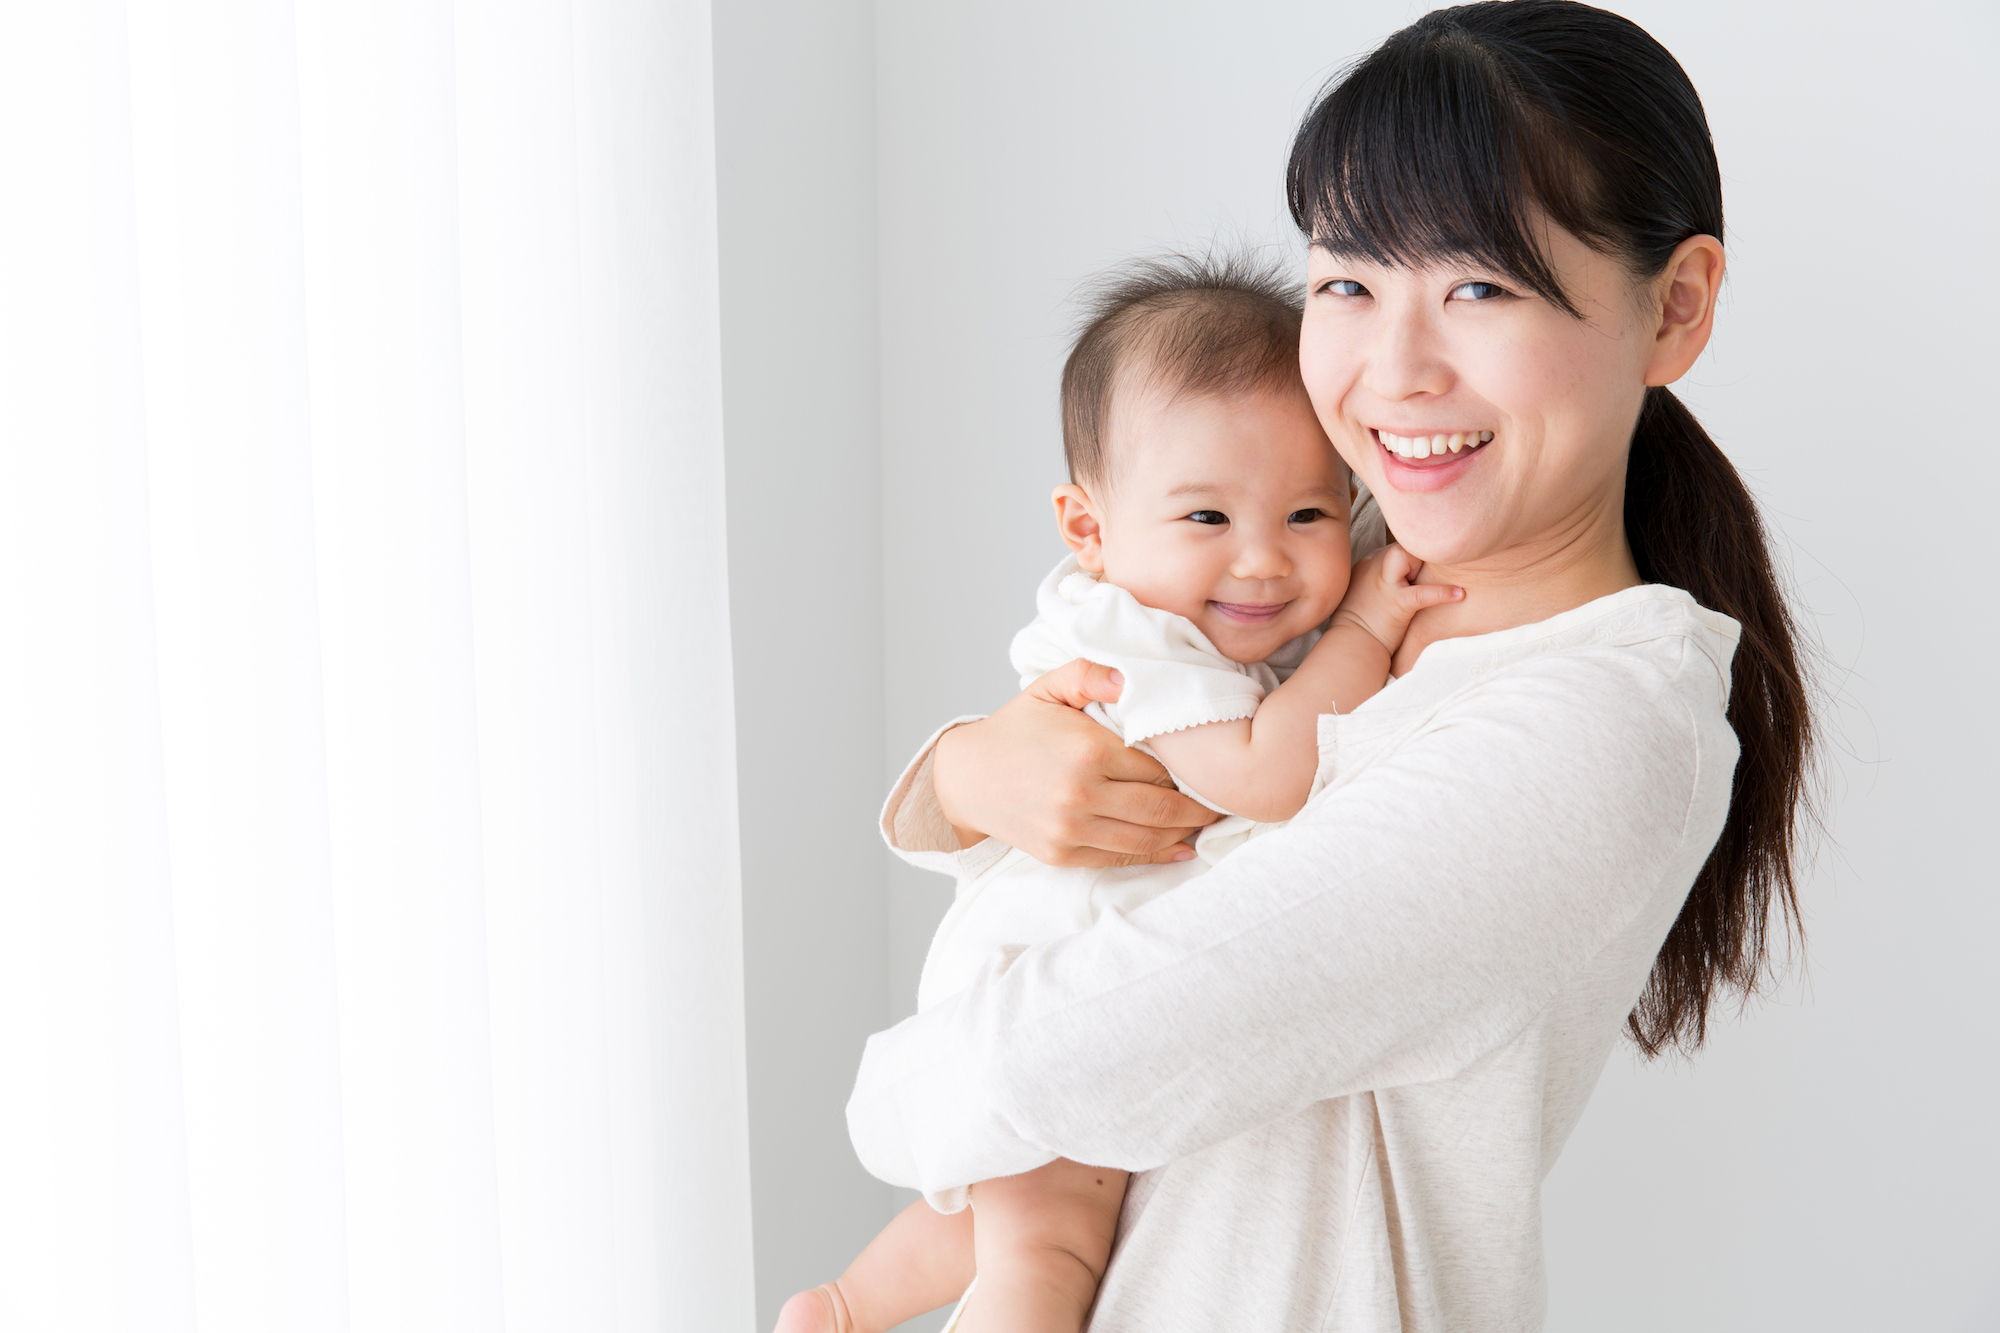 Many Chinese parents are prepared to shop around to find high-quality infant formula products